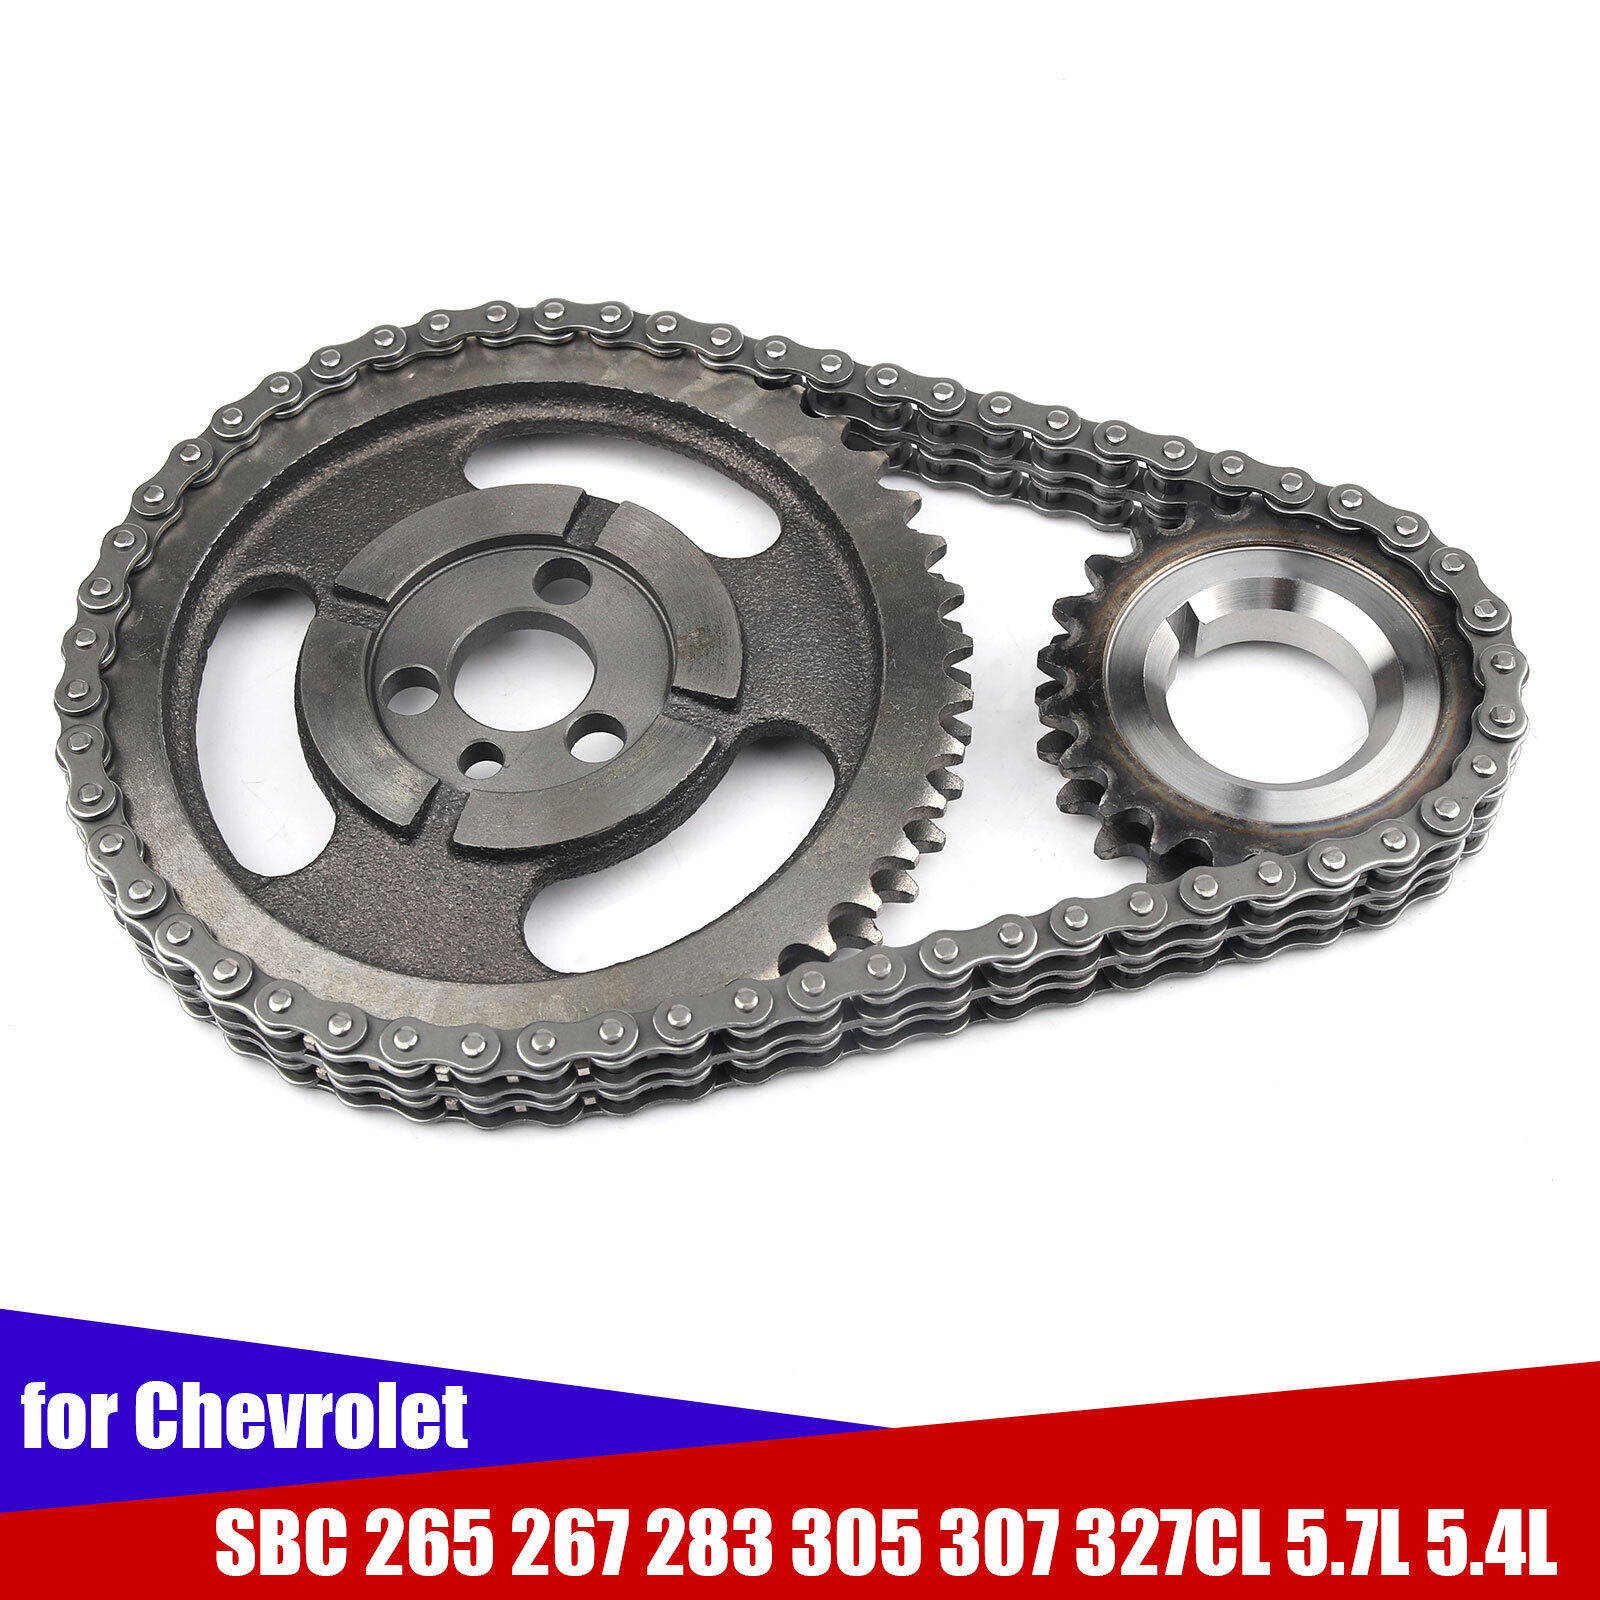 HD Double Roller Timing Chain Set for Chevrolet SBC 5.7L 283 305 327 350 383 400